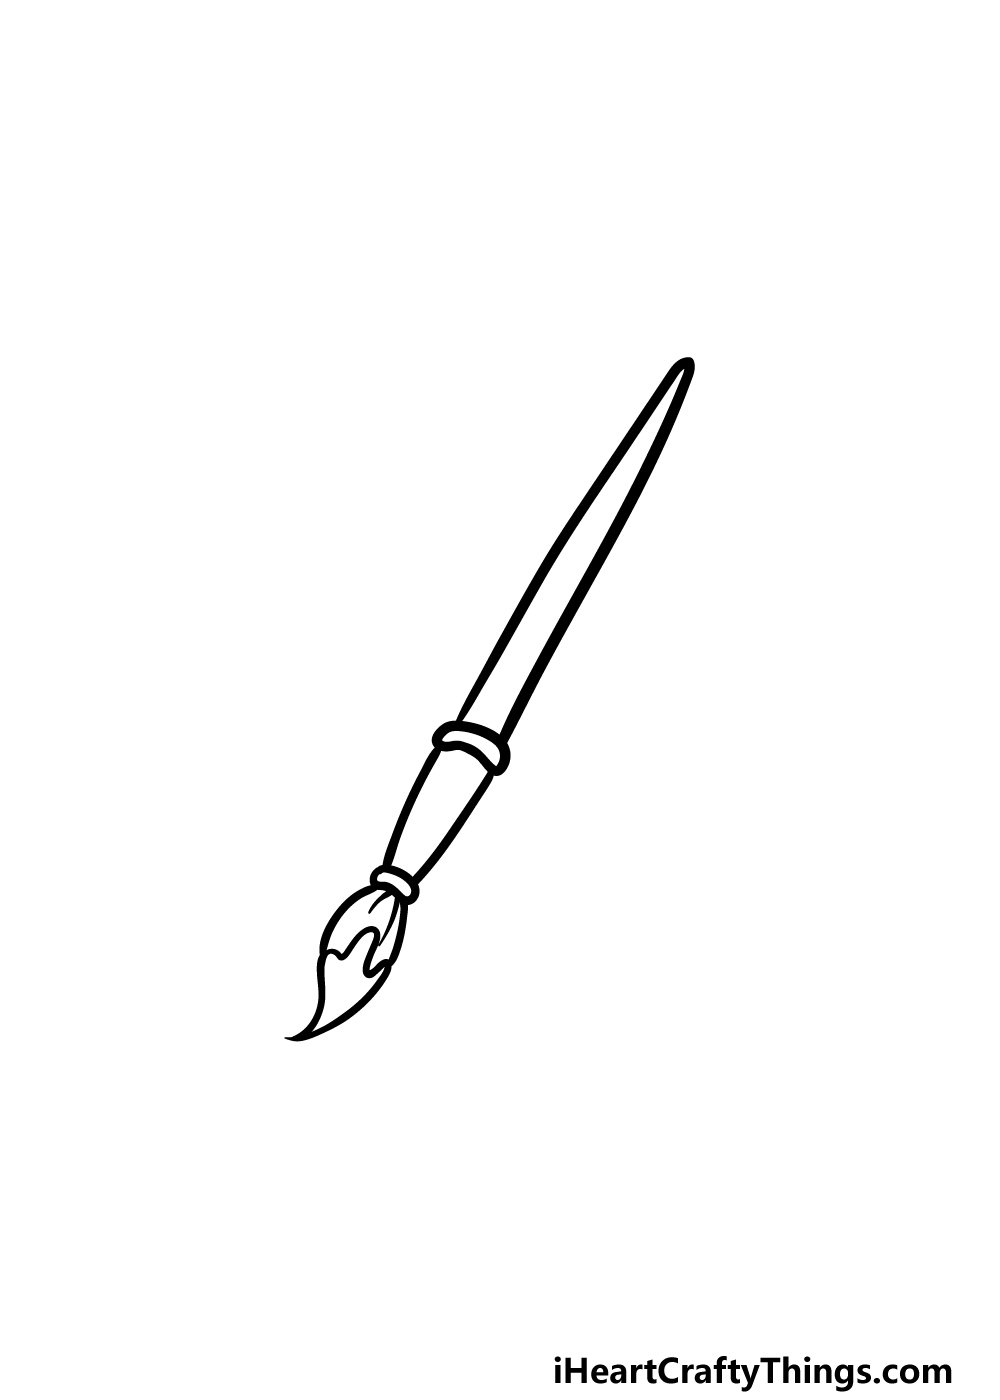 Paintbrush Drawing - How To Draw A Paintbrush Step By Step